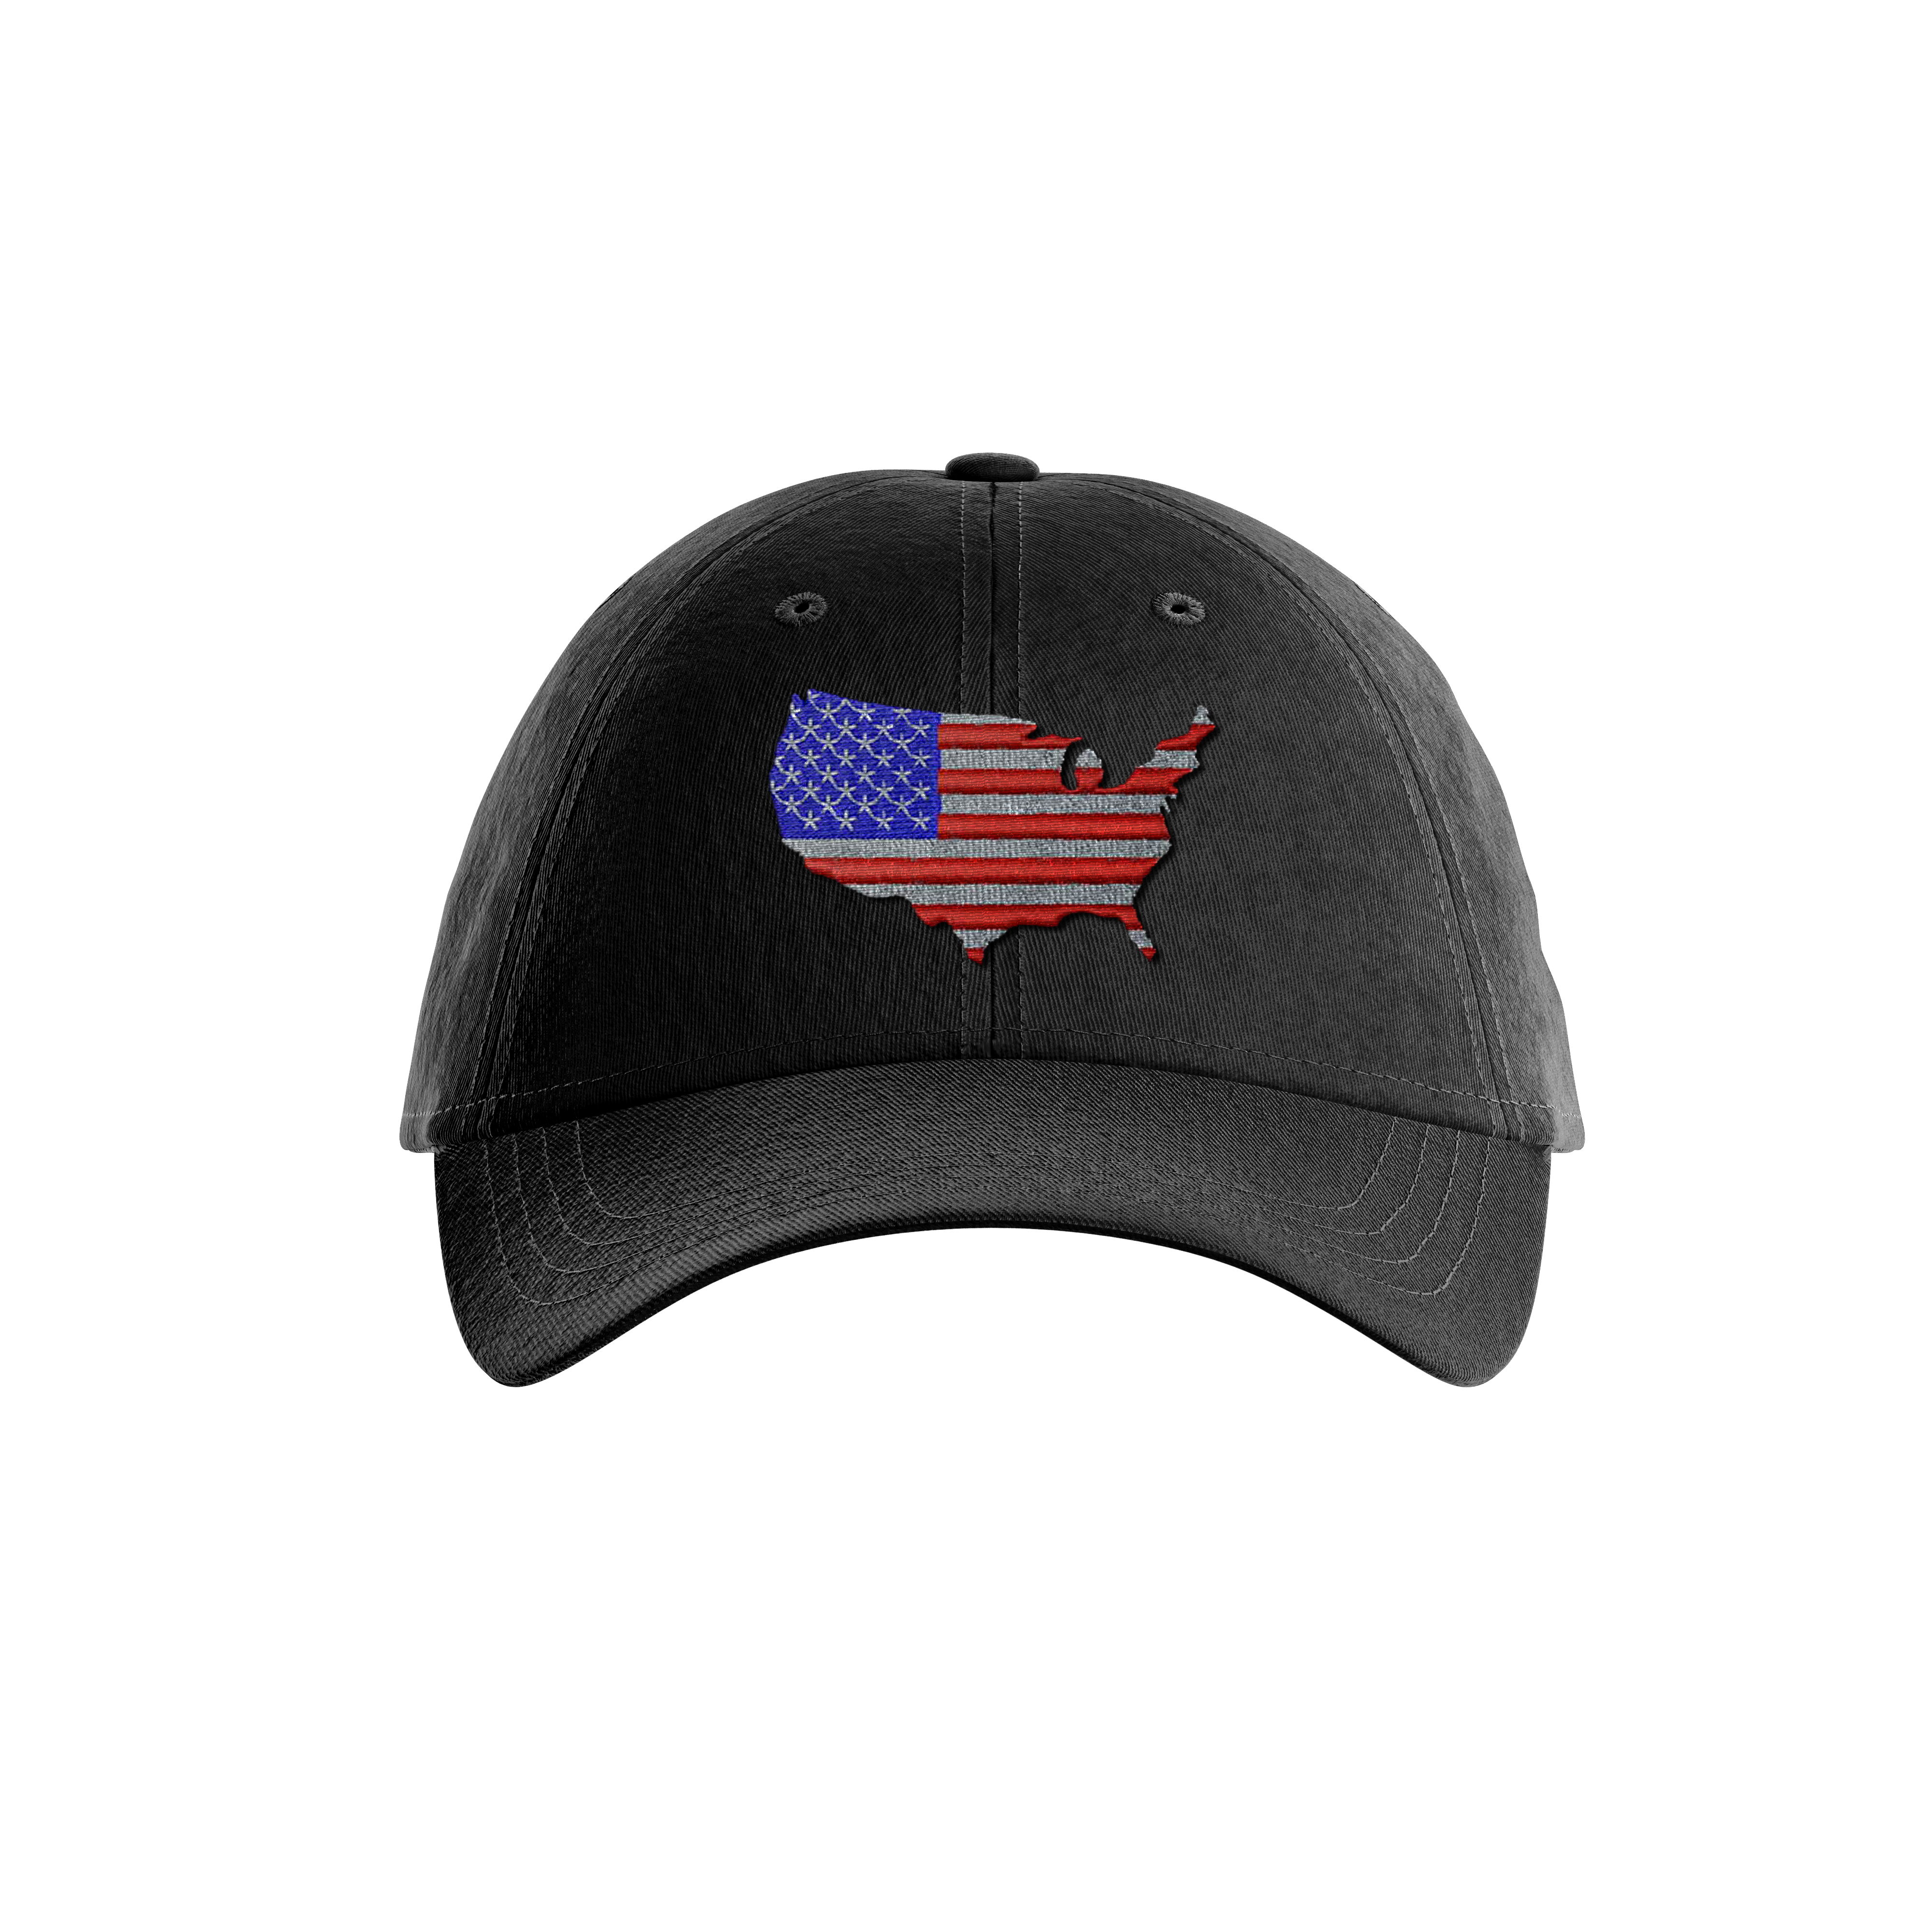 USA Dad hat - Greater Half